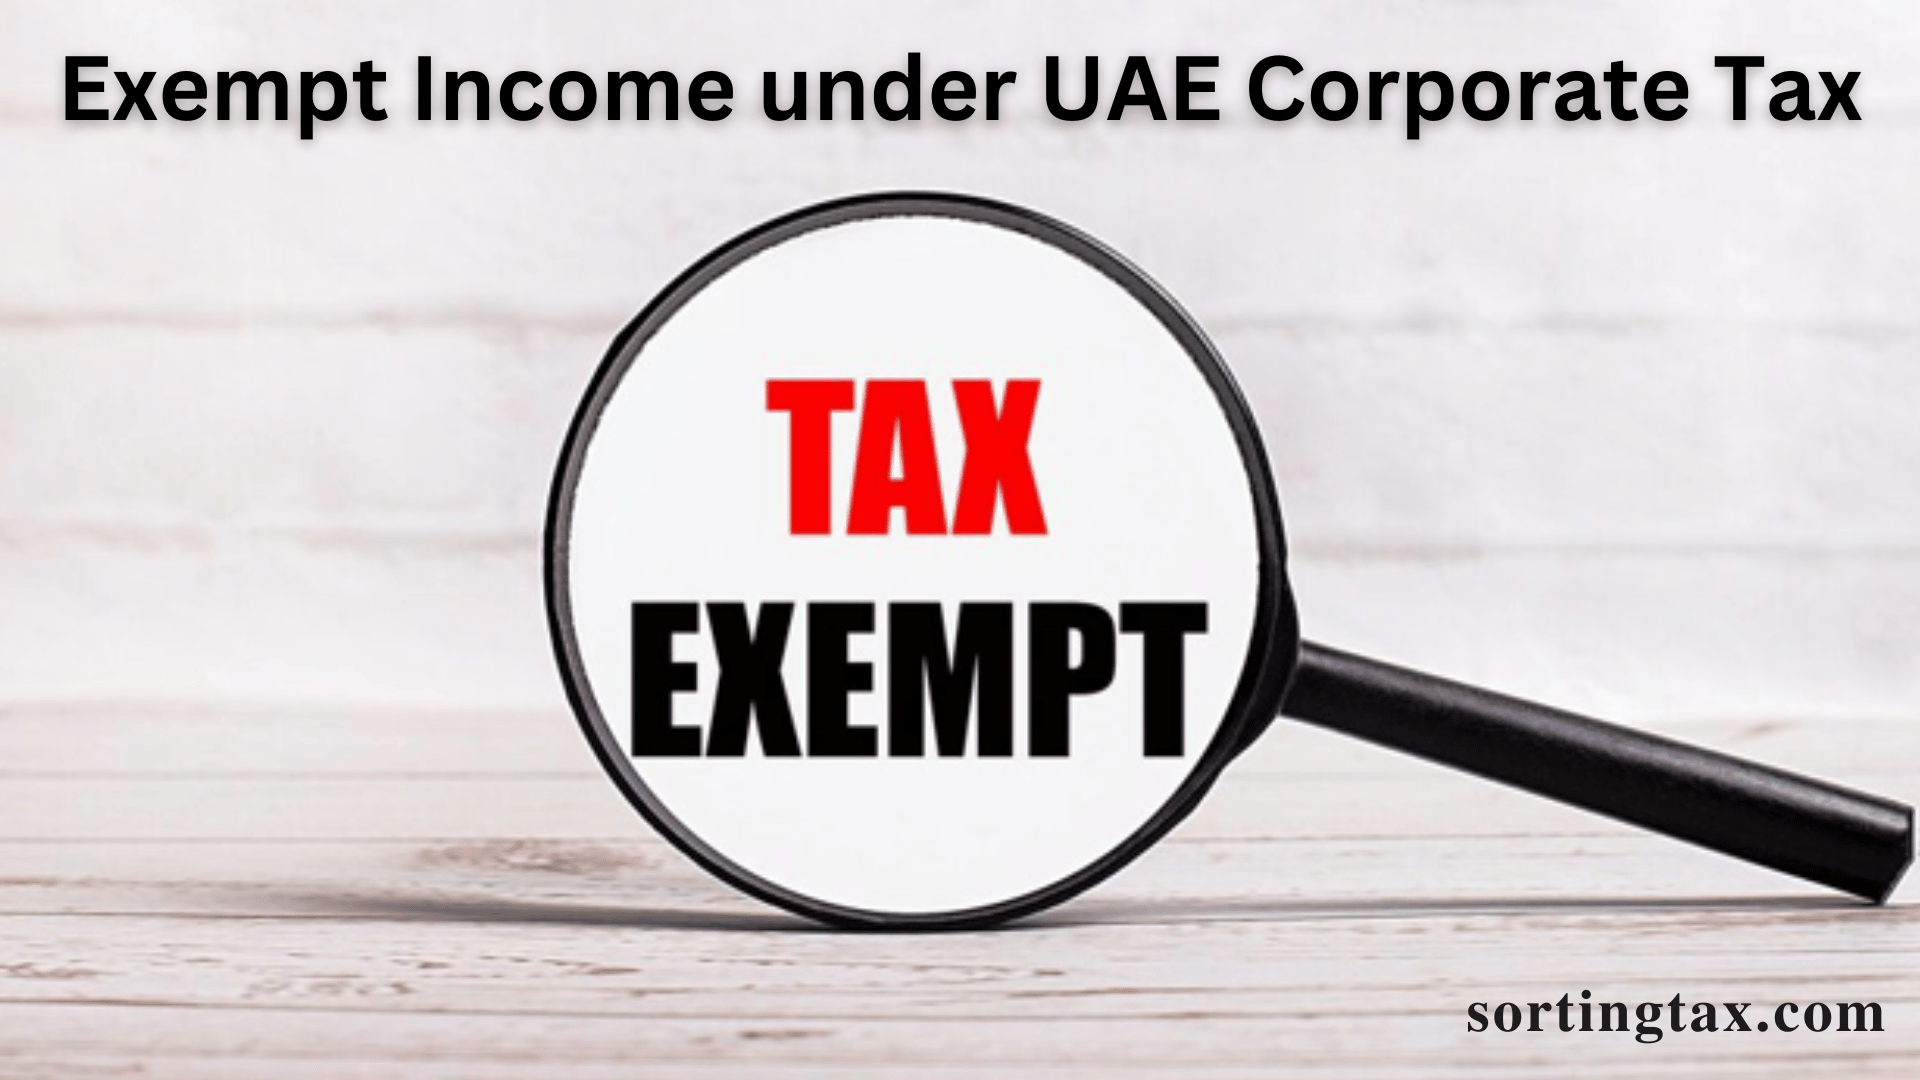 Exempt Income under UAE Corporate Tax